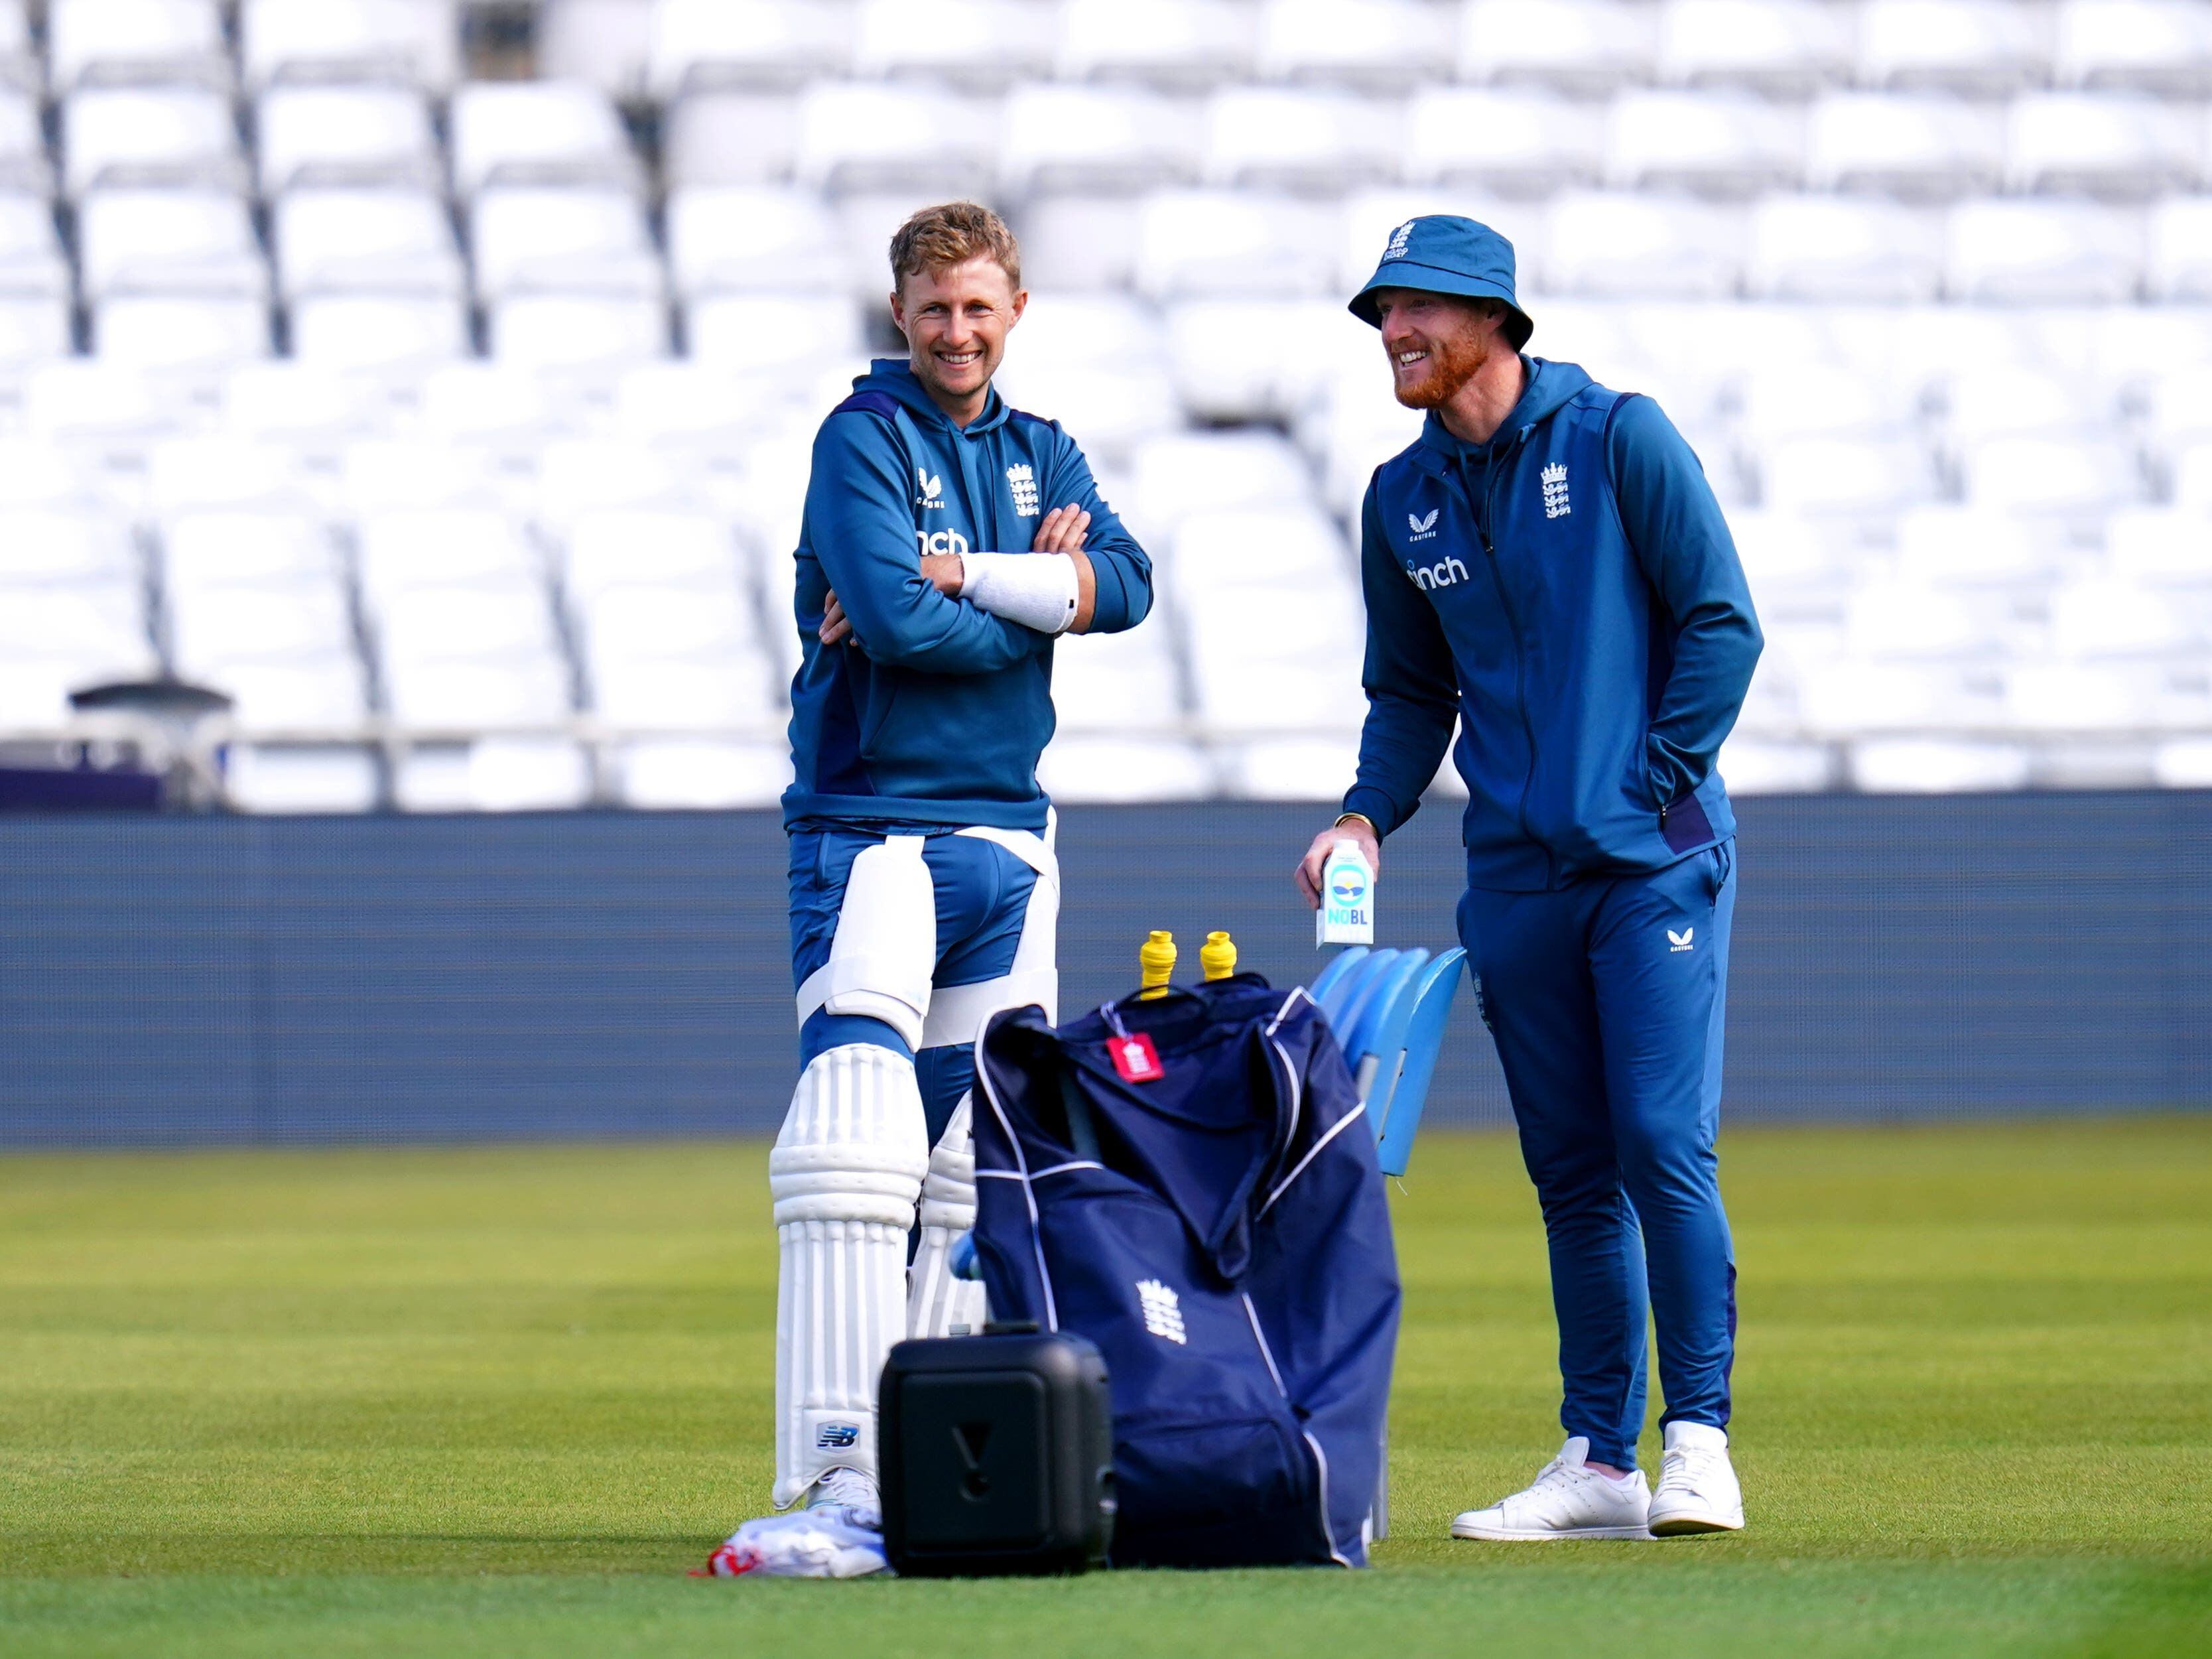 Joe Root joins England captain Ben Stokes in skipping next Indian Premier League